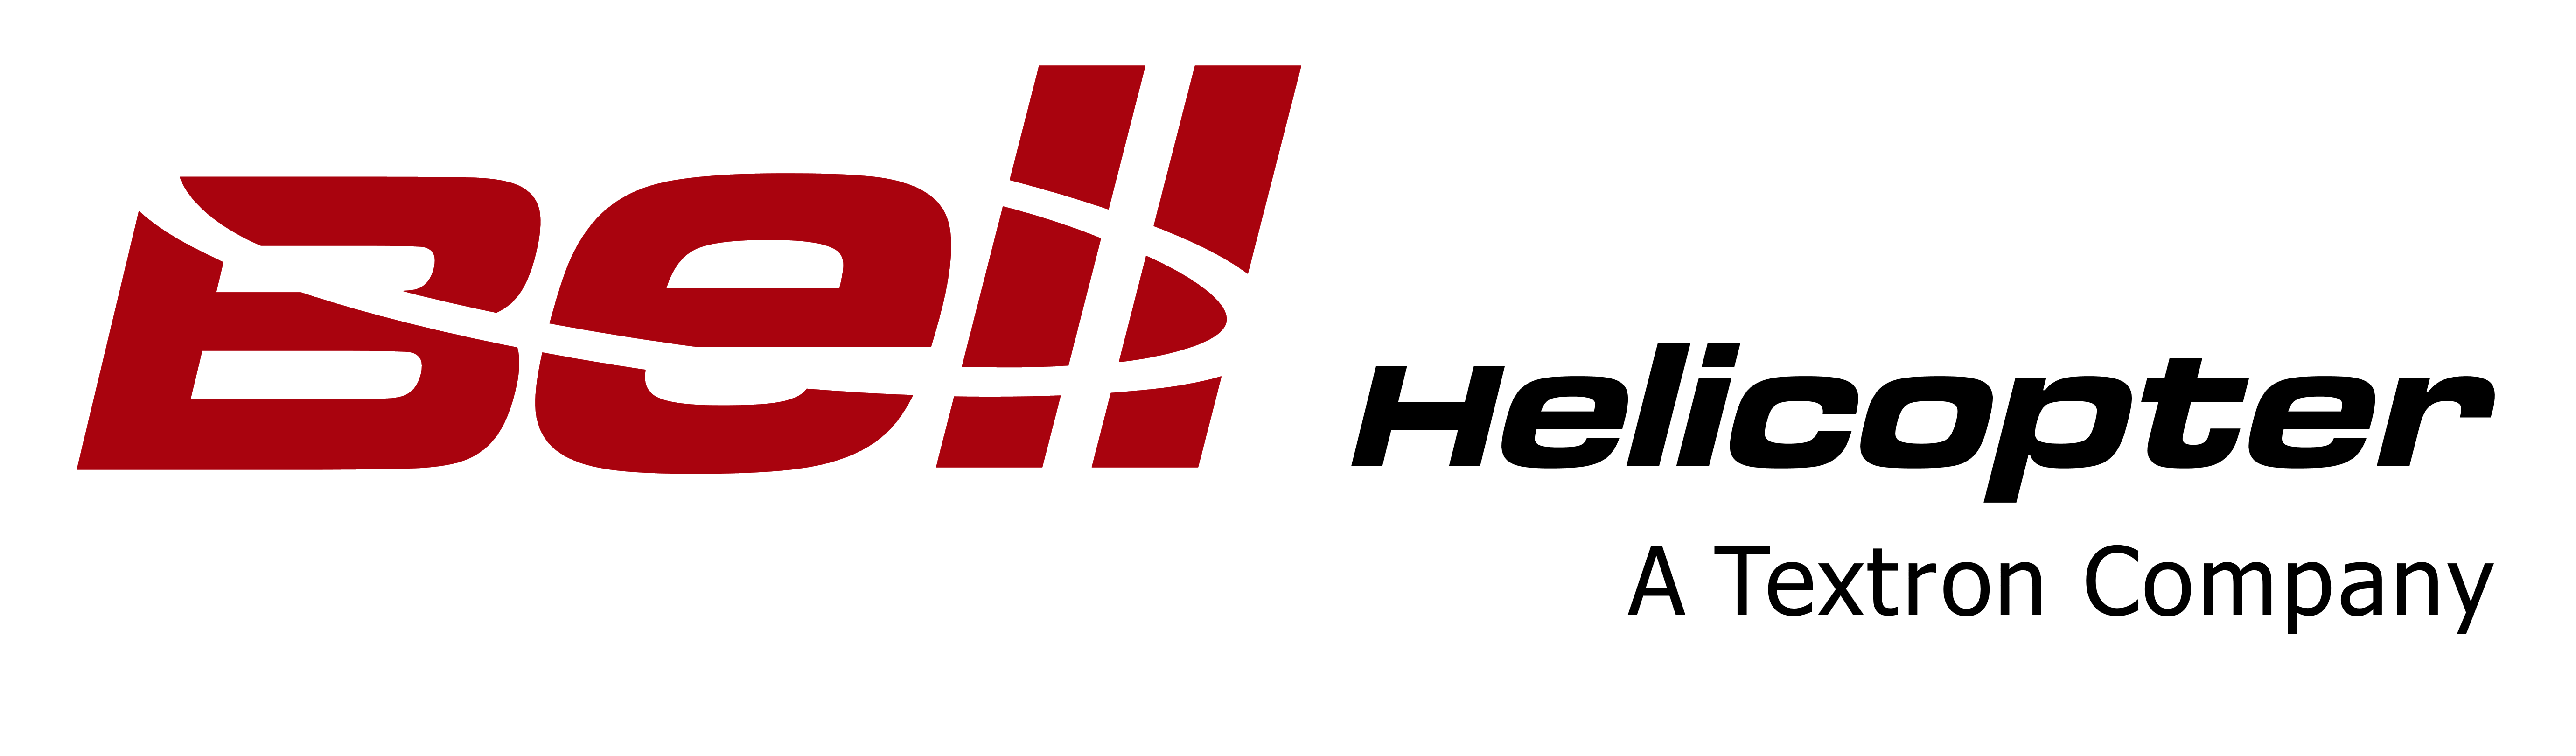 Helicopter Logo - Bell Helicopter